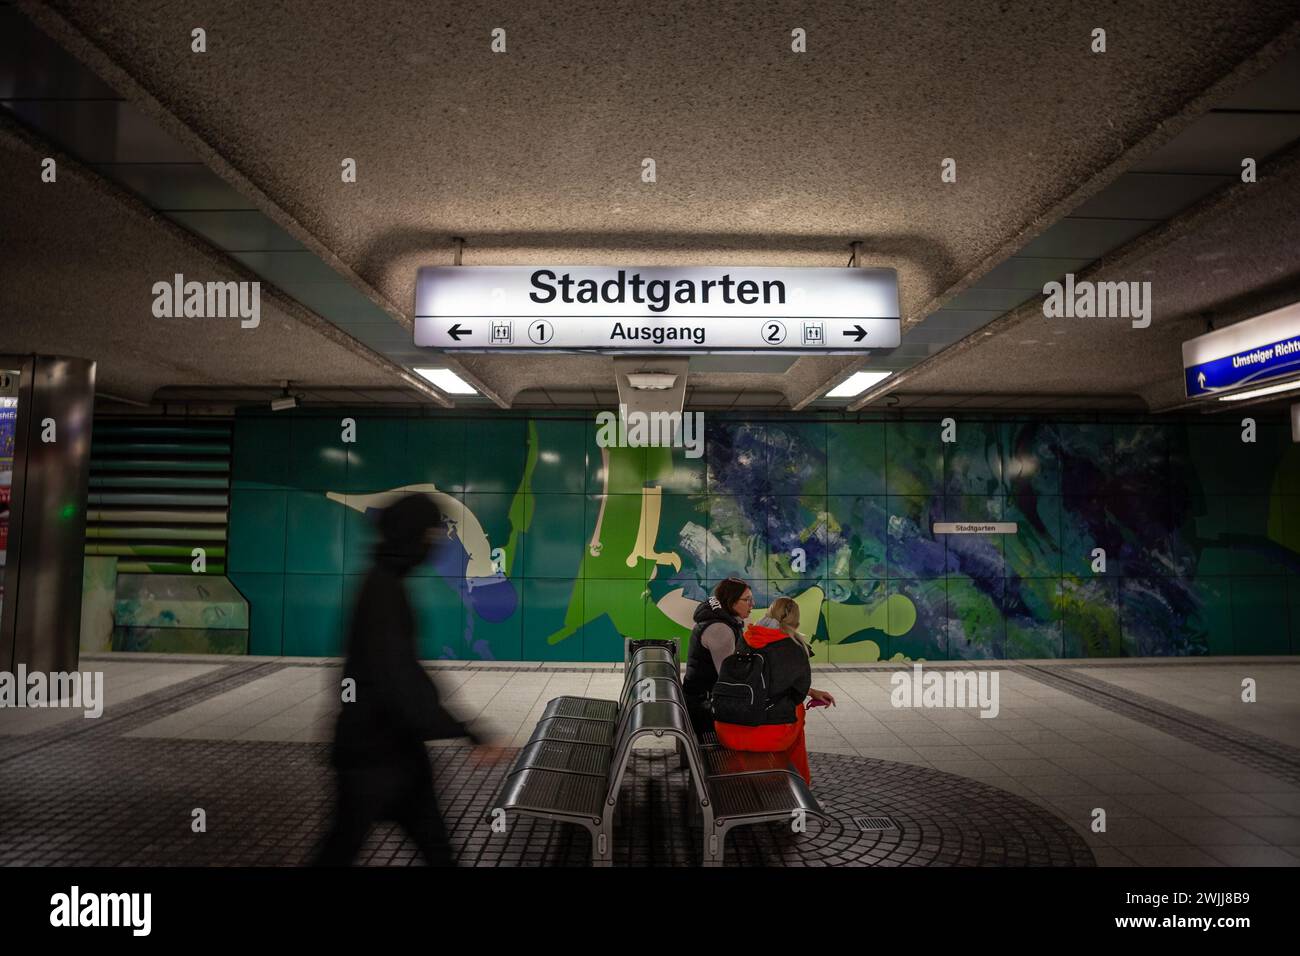 Picture of a the sign indicating Stadtgarten station of the U-Bahn system of Dortmund, Stadtbahn Dortmund. The Dortmund Stadtbahn is a light rail syst Stock Photo